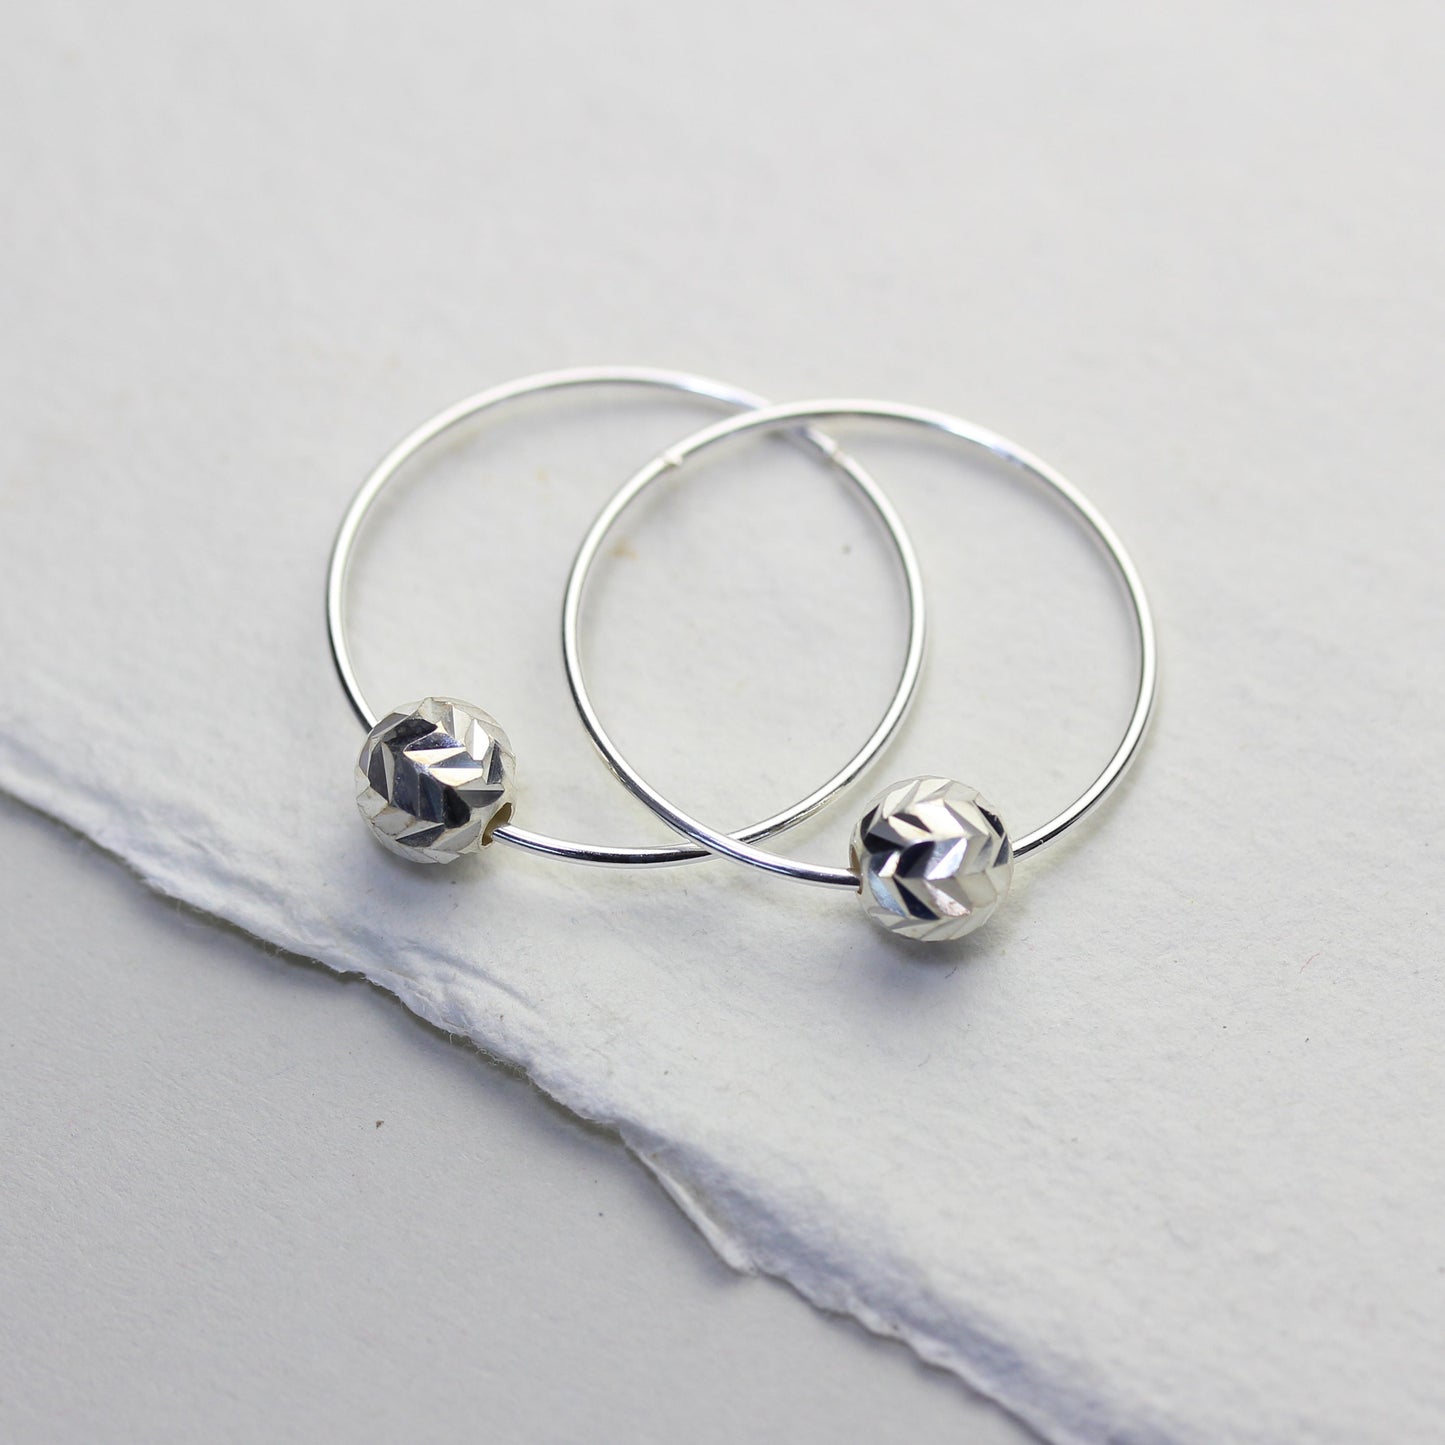 Sterling Silver 18mm Hoop Earrings with Chevron Cut Ball Beads